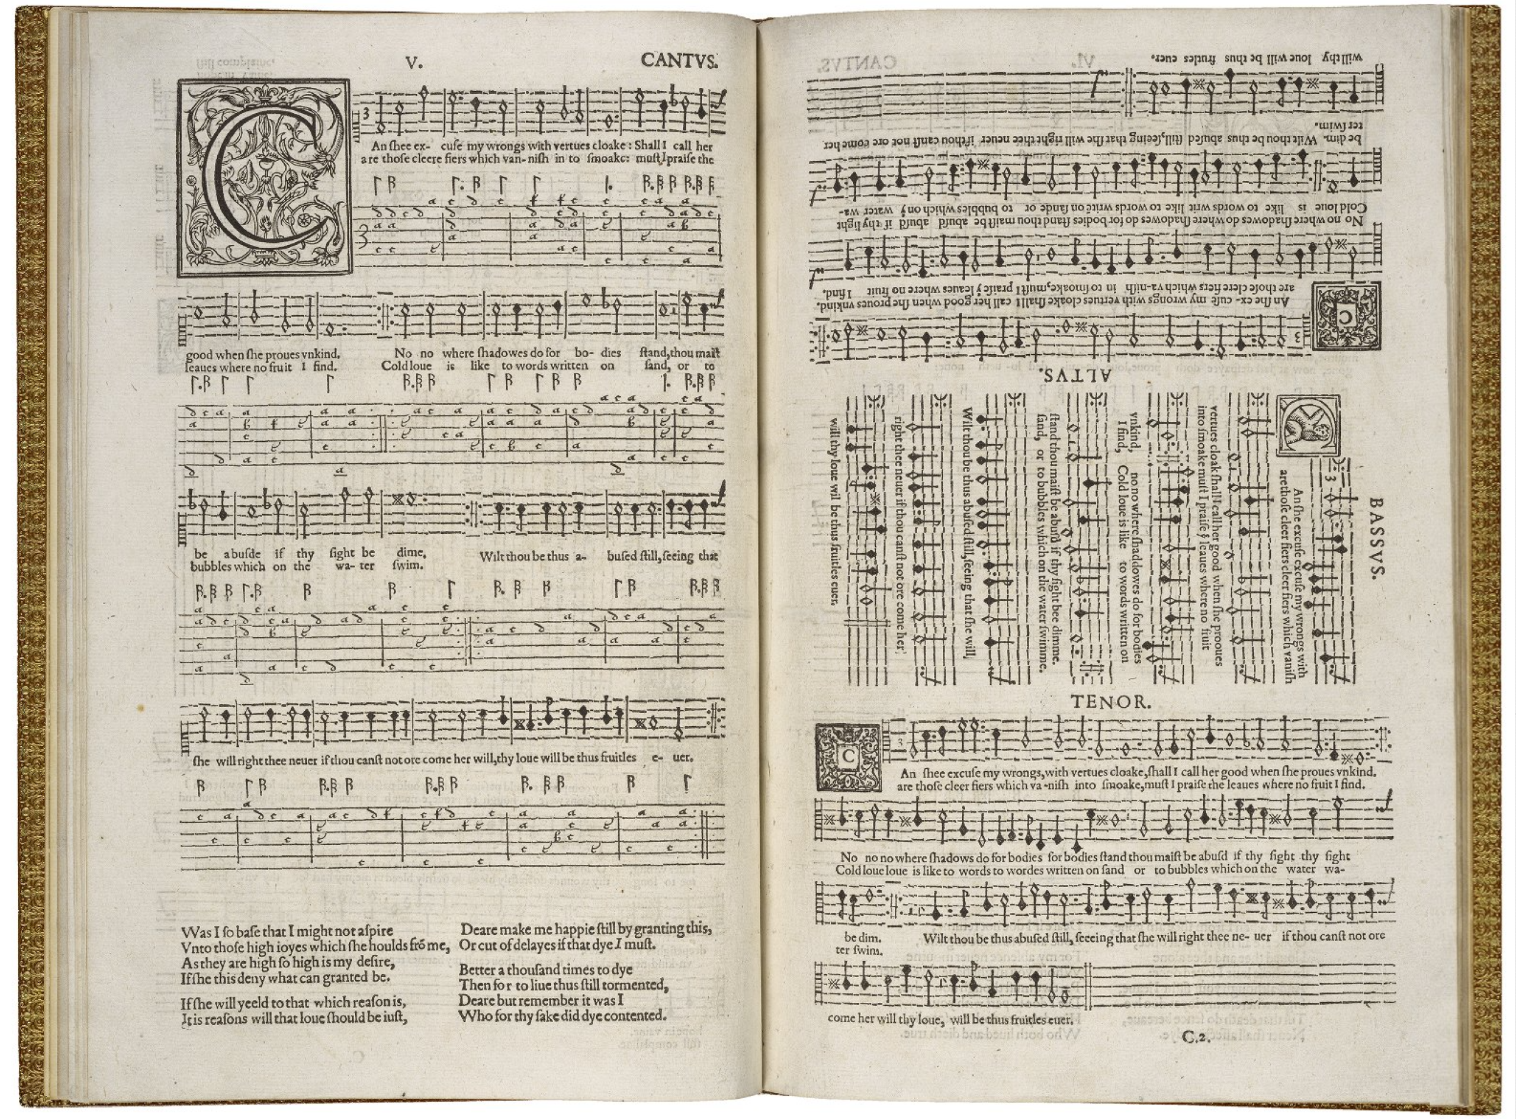 A picture the shows an open book with the page layout of a lute tablature.